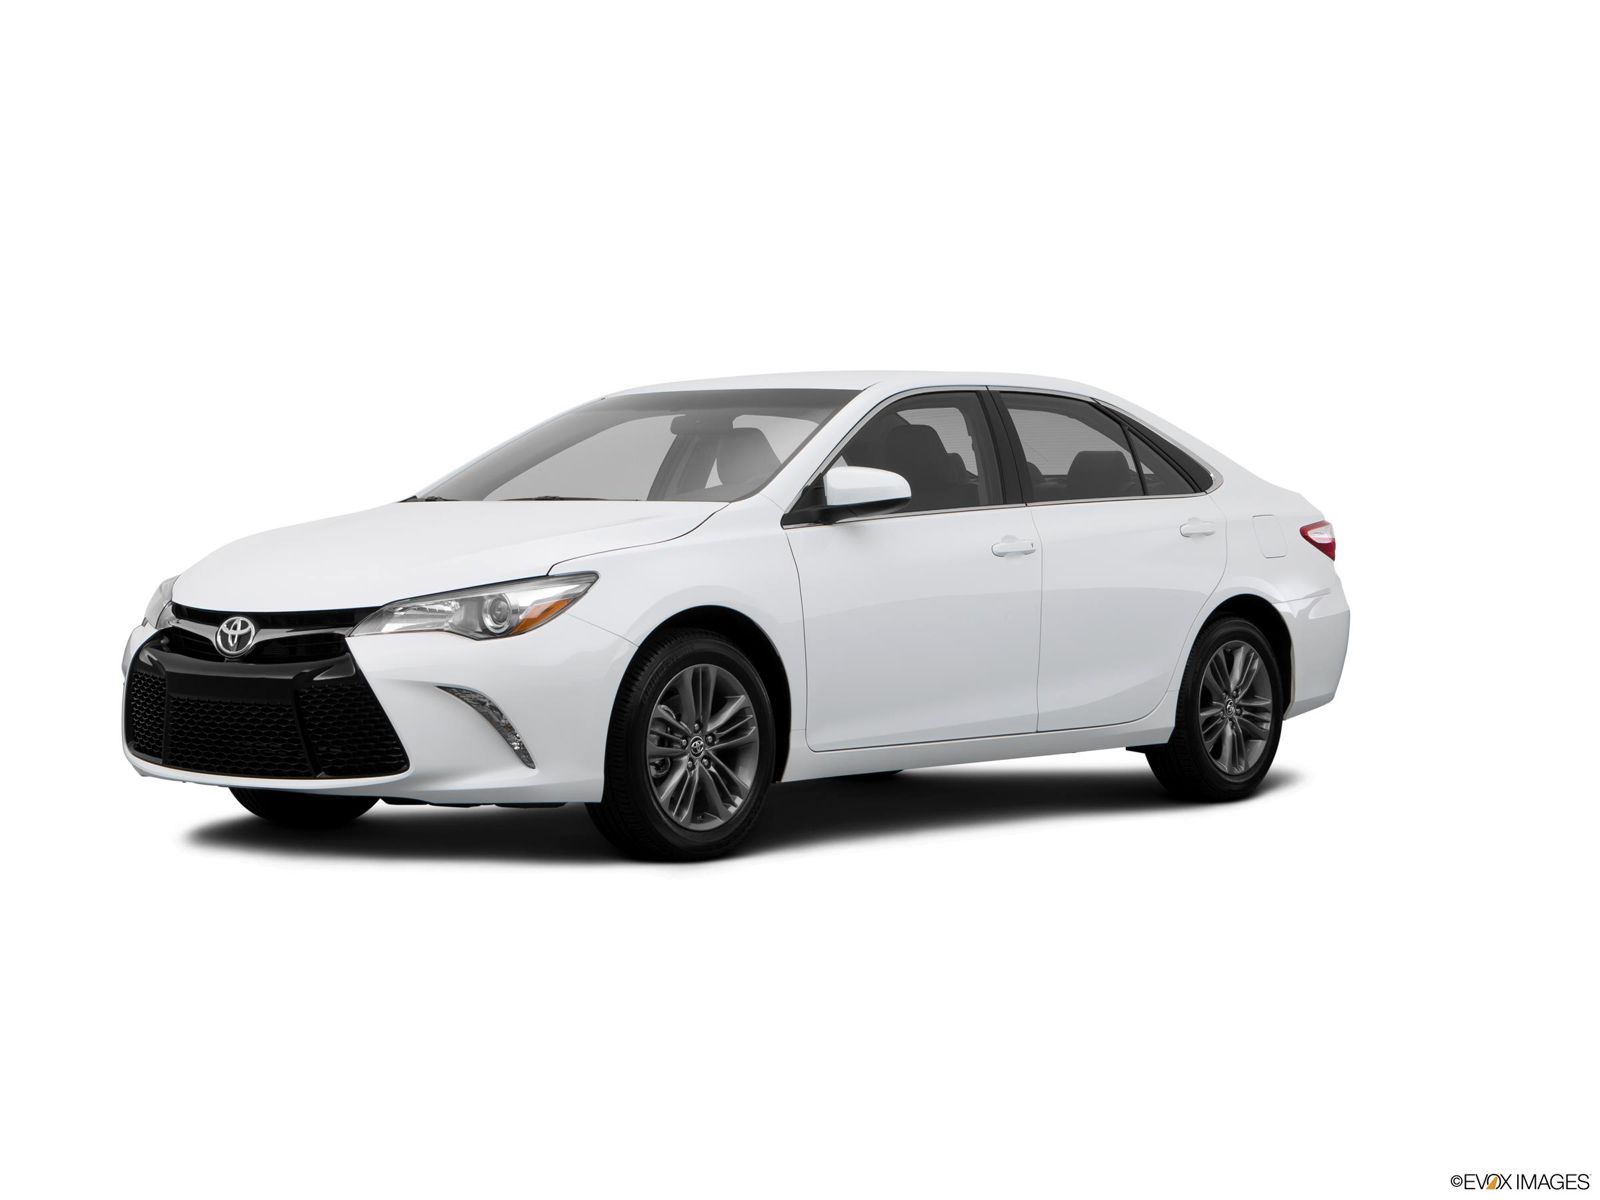 2015 Toyota Camry Research, photos, specs, and expertise | CarMax